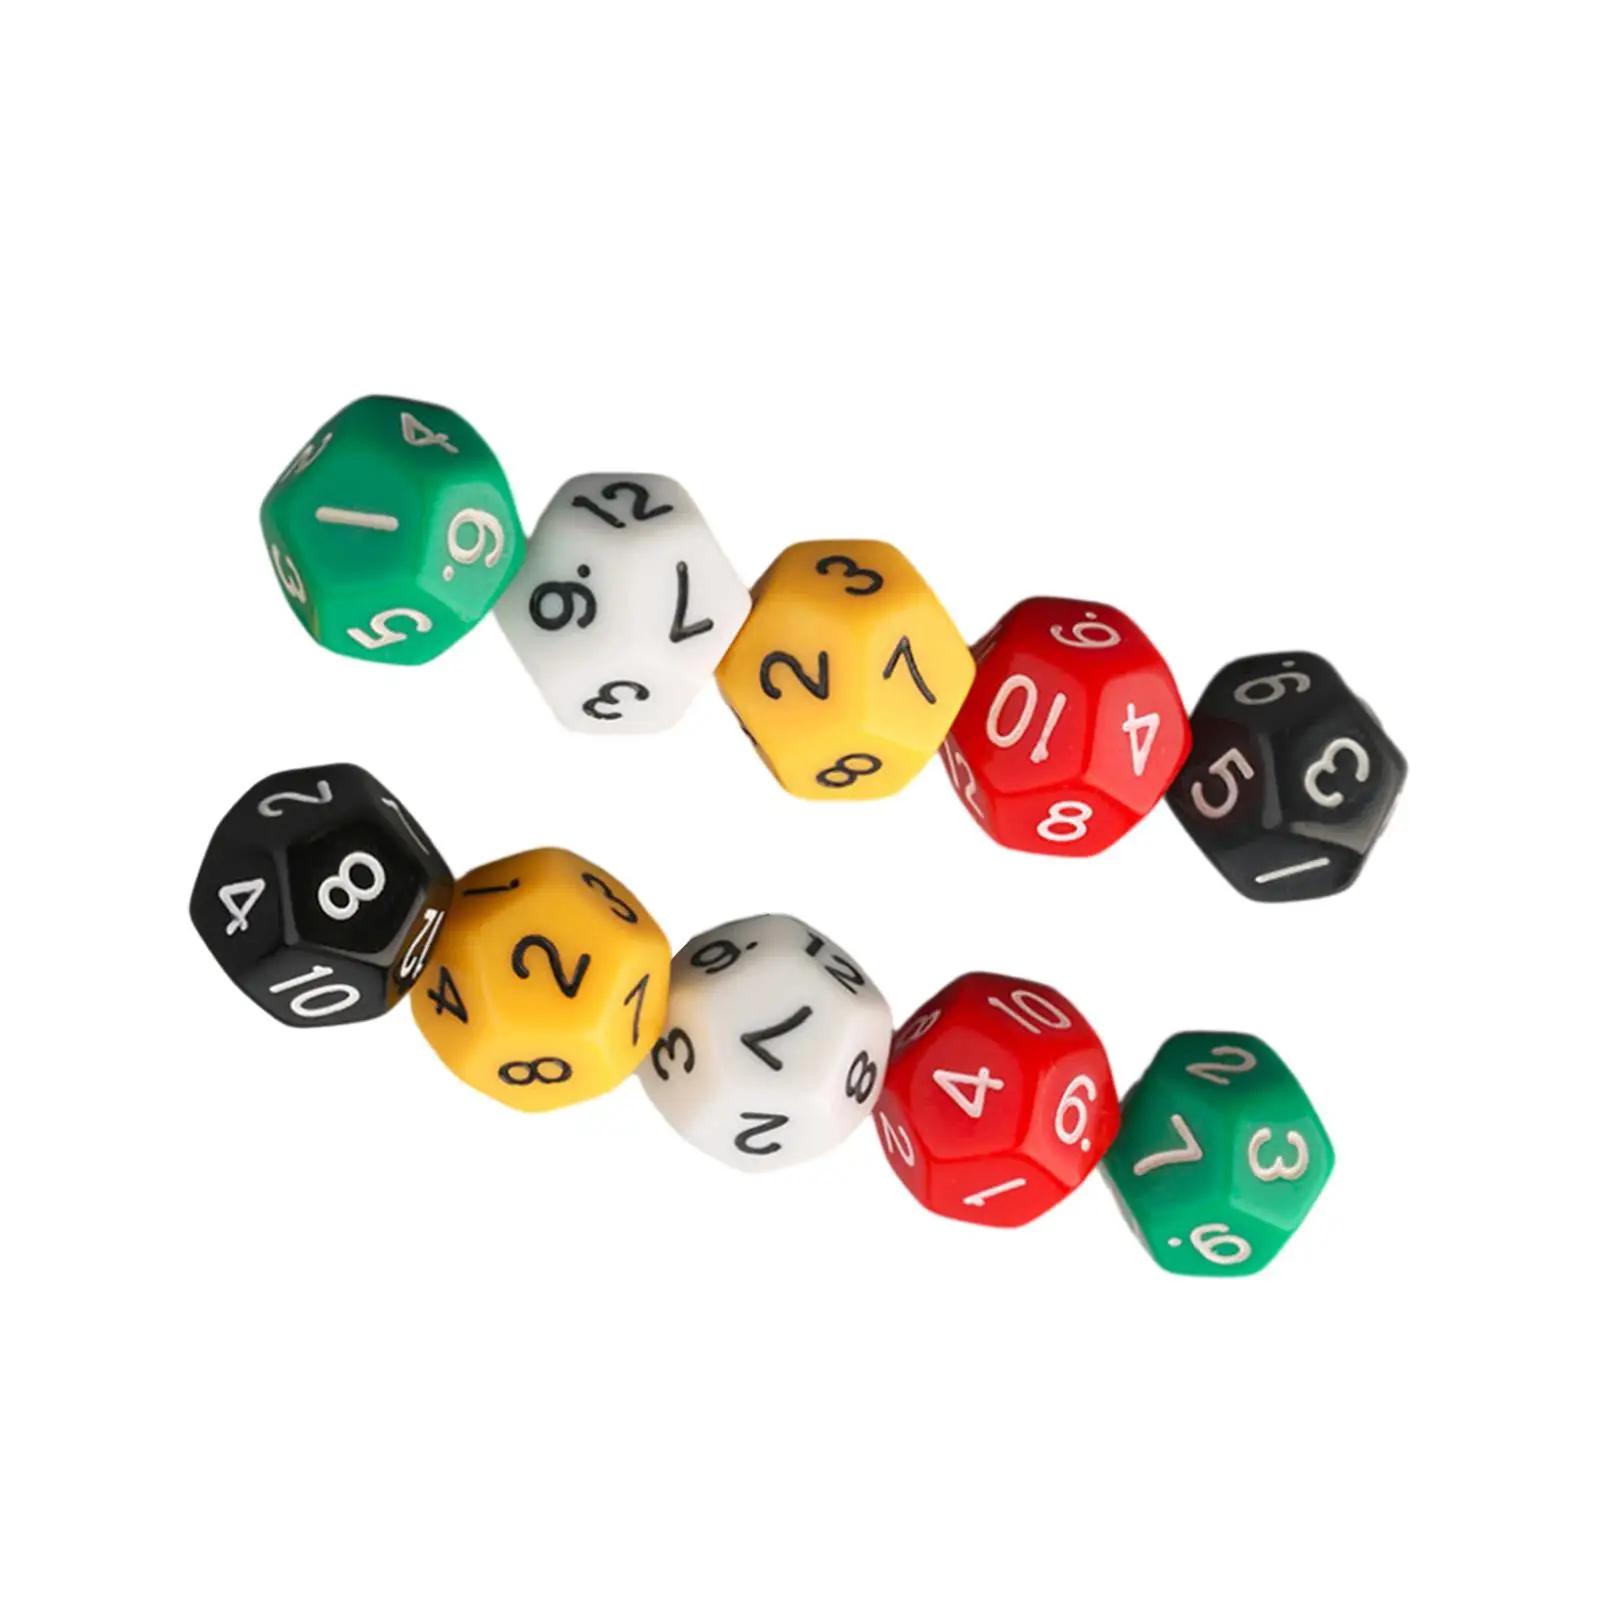 10Pcs D12 Polyhedral Dice Entertainment Toys Game Dices Multi Sided Dices for Role Playing Party Game Board Game Card Game